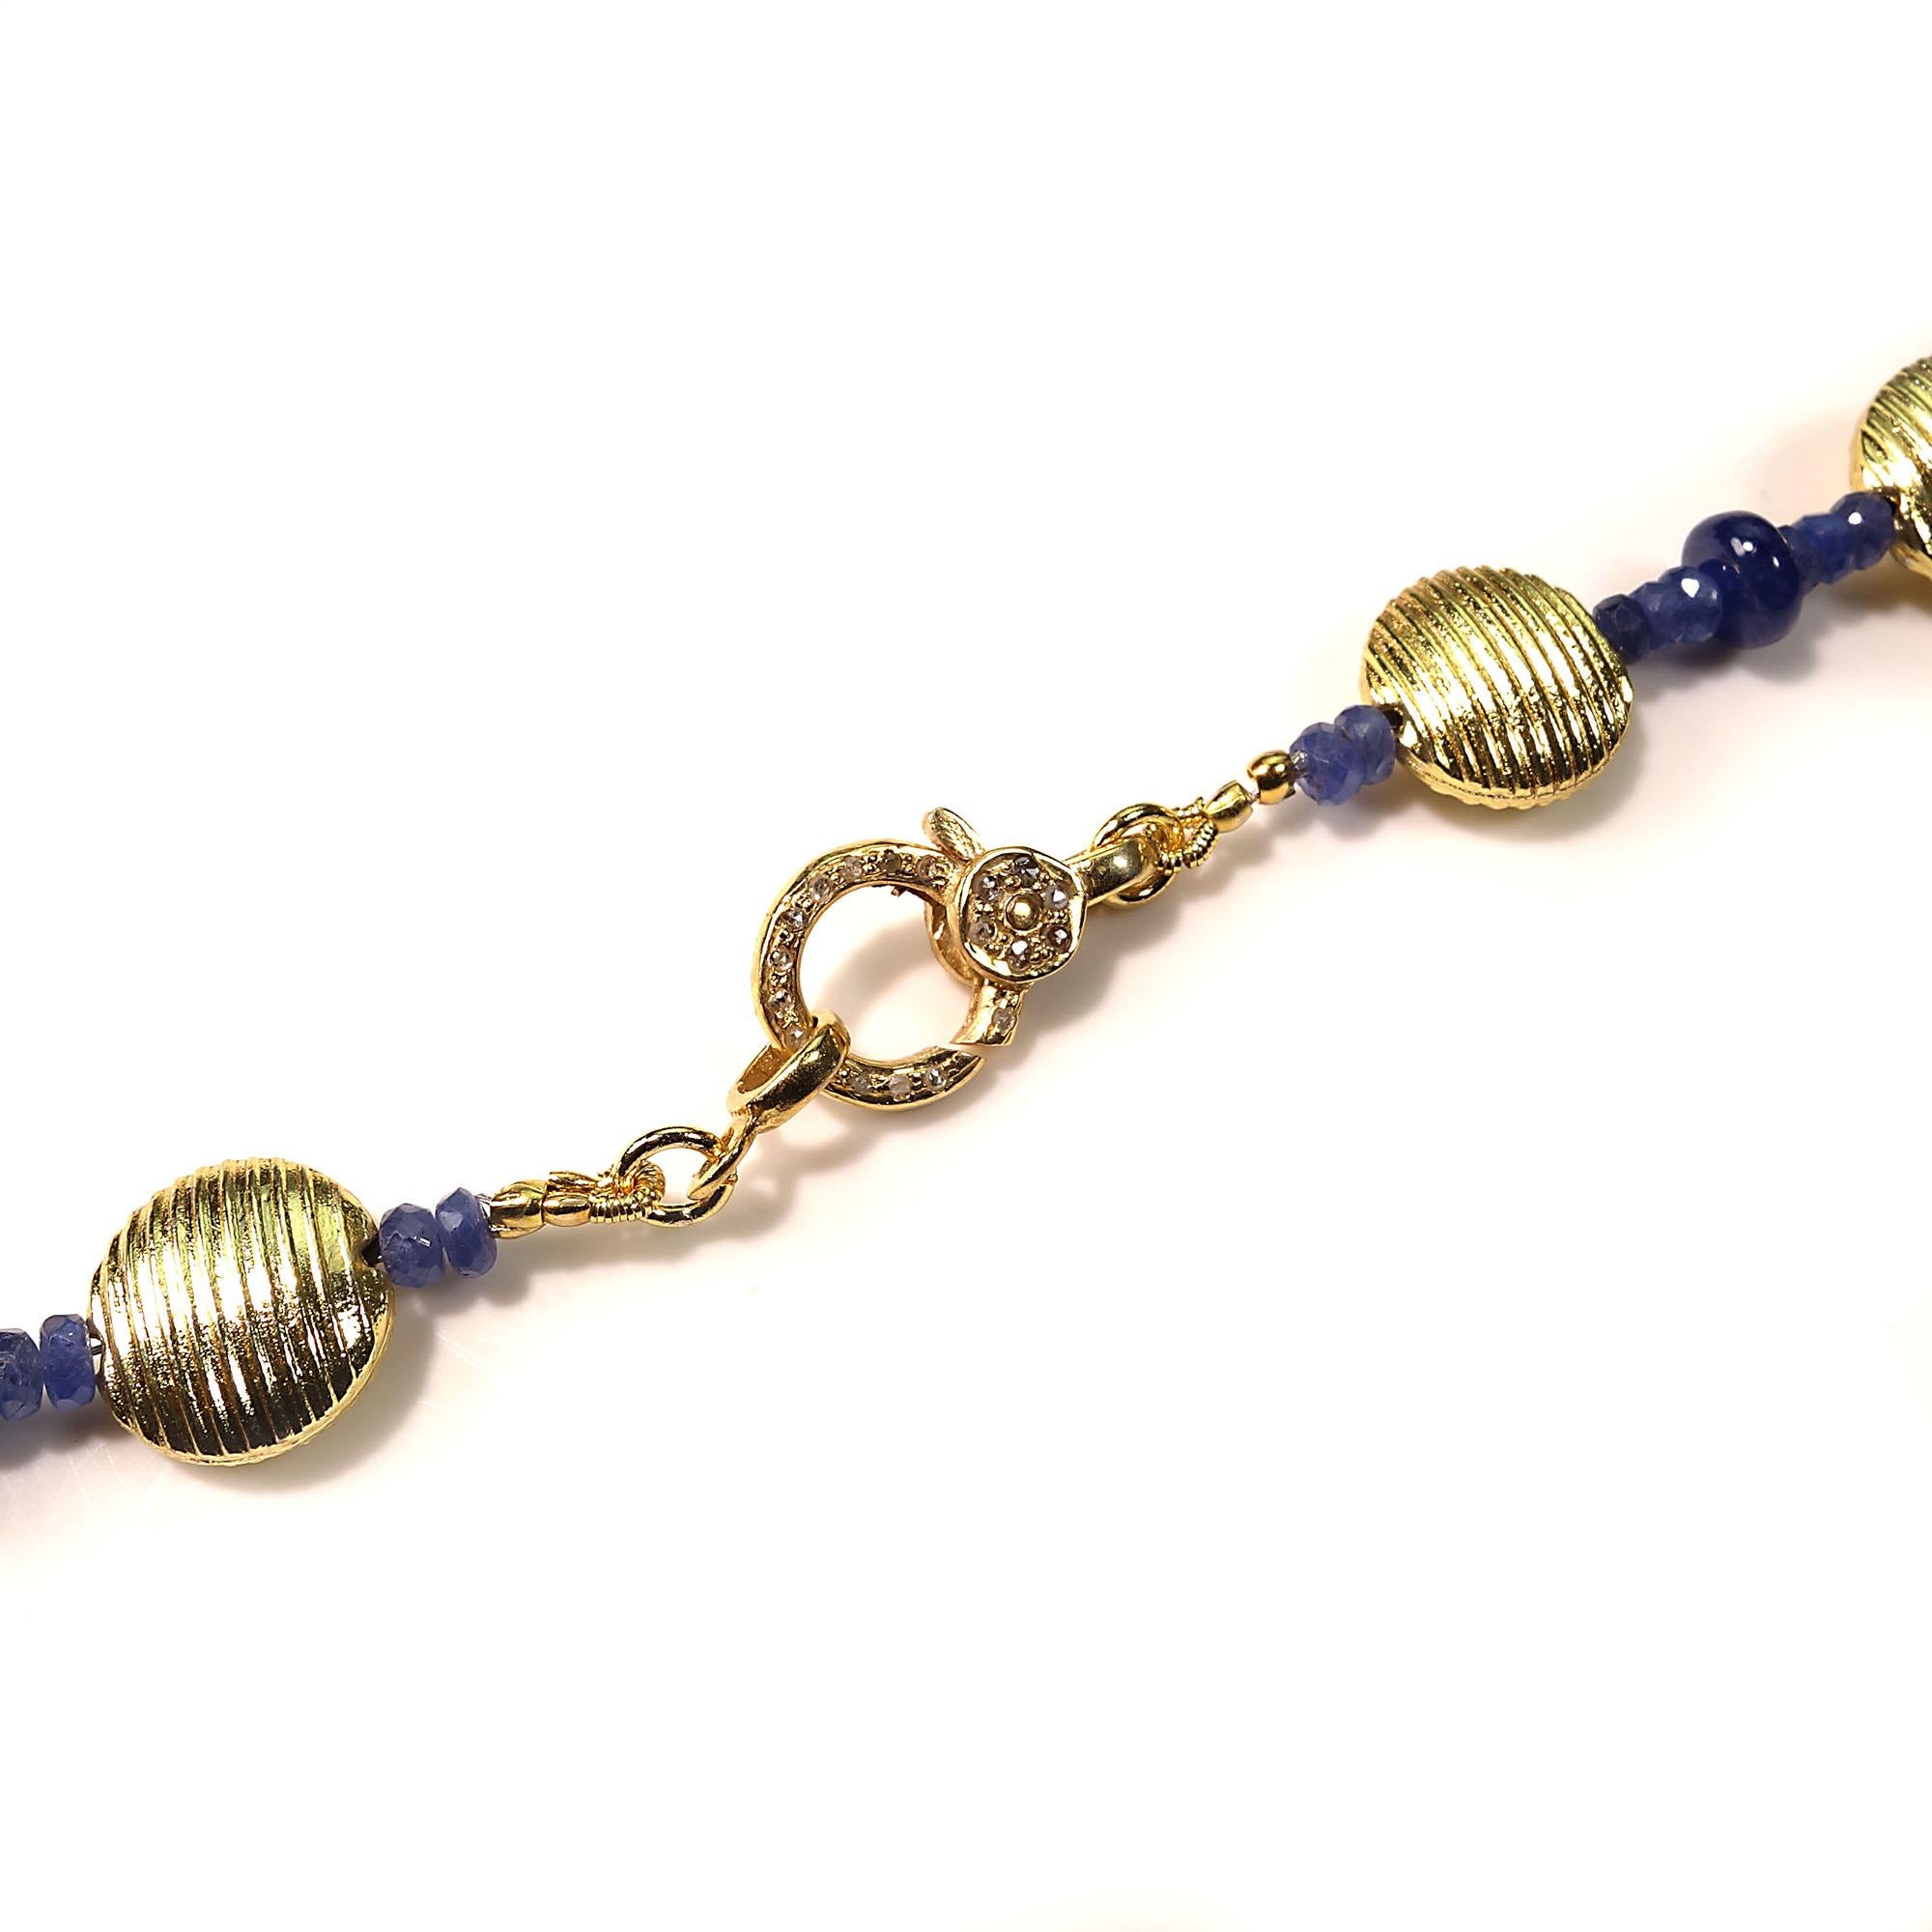 Artisan  AJD Elegant Blue Sapphire and Gold Choker Necklace  Great Gift!! For Sale